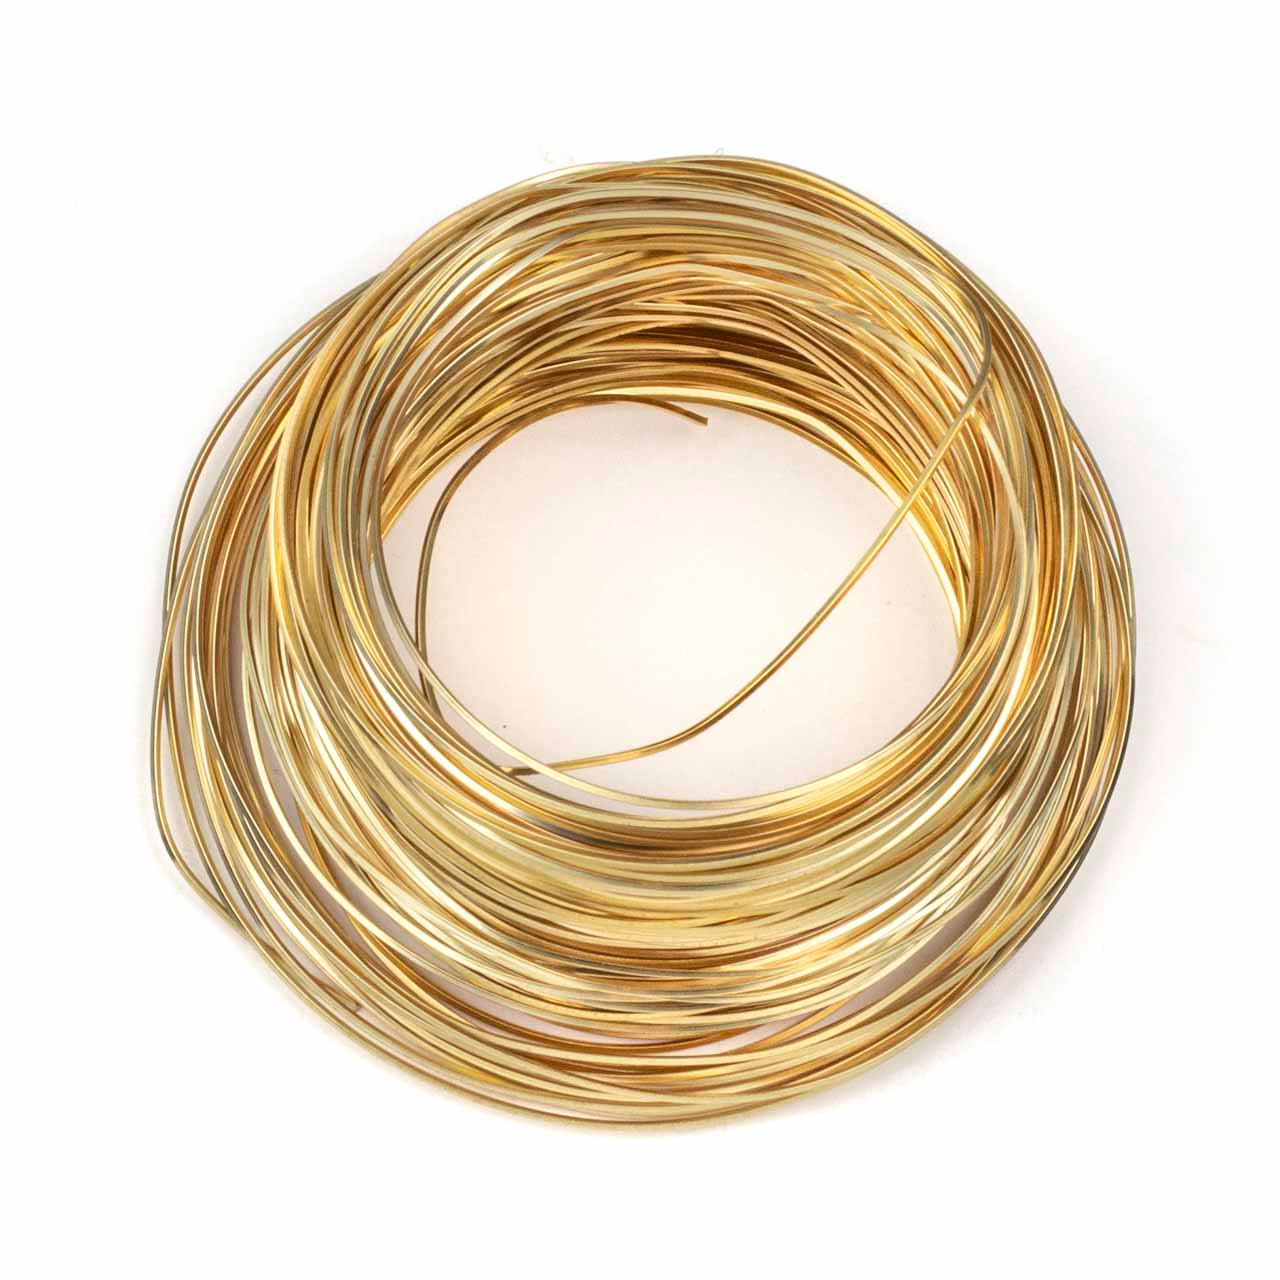 18 Gauge Coated Tarnish Resistant Copper Wire on 7-Yard Spool